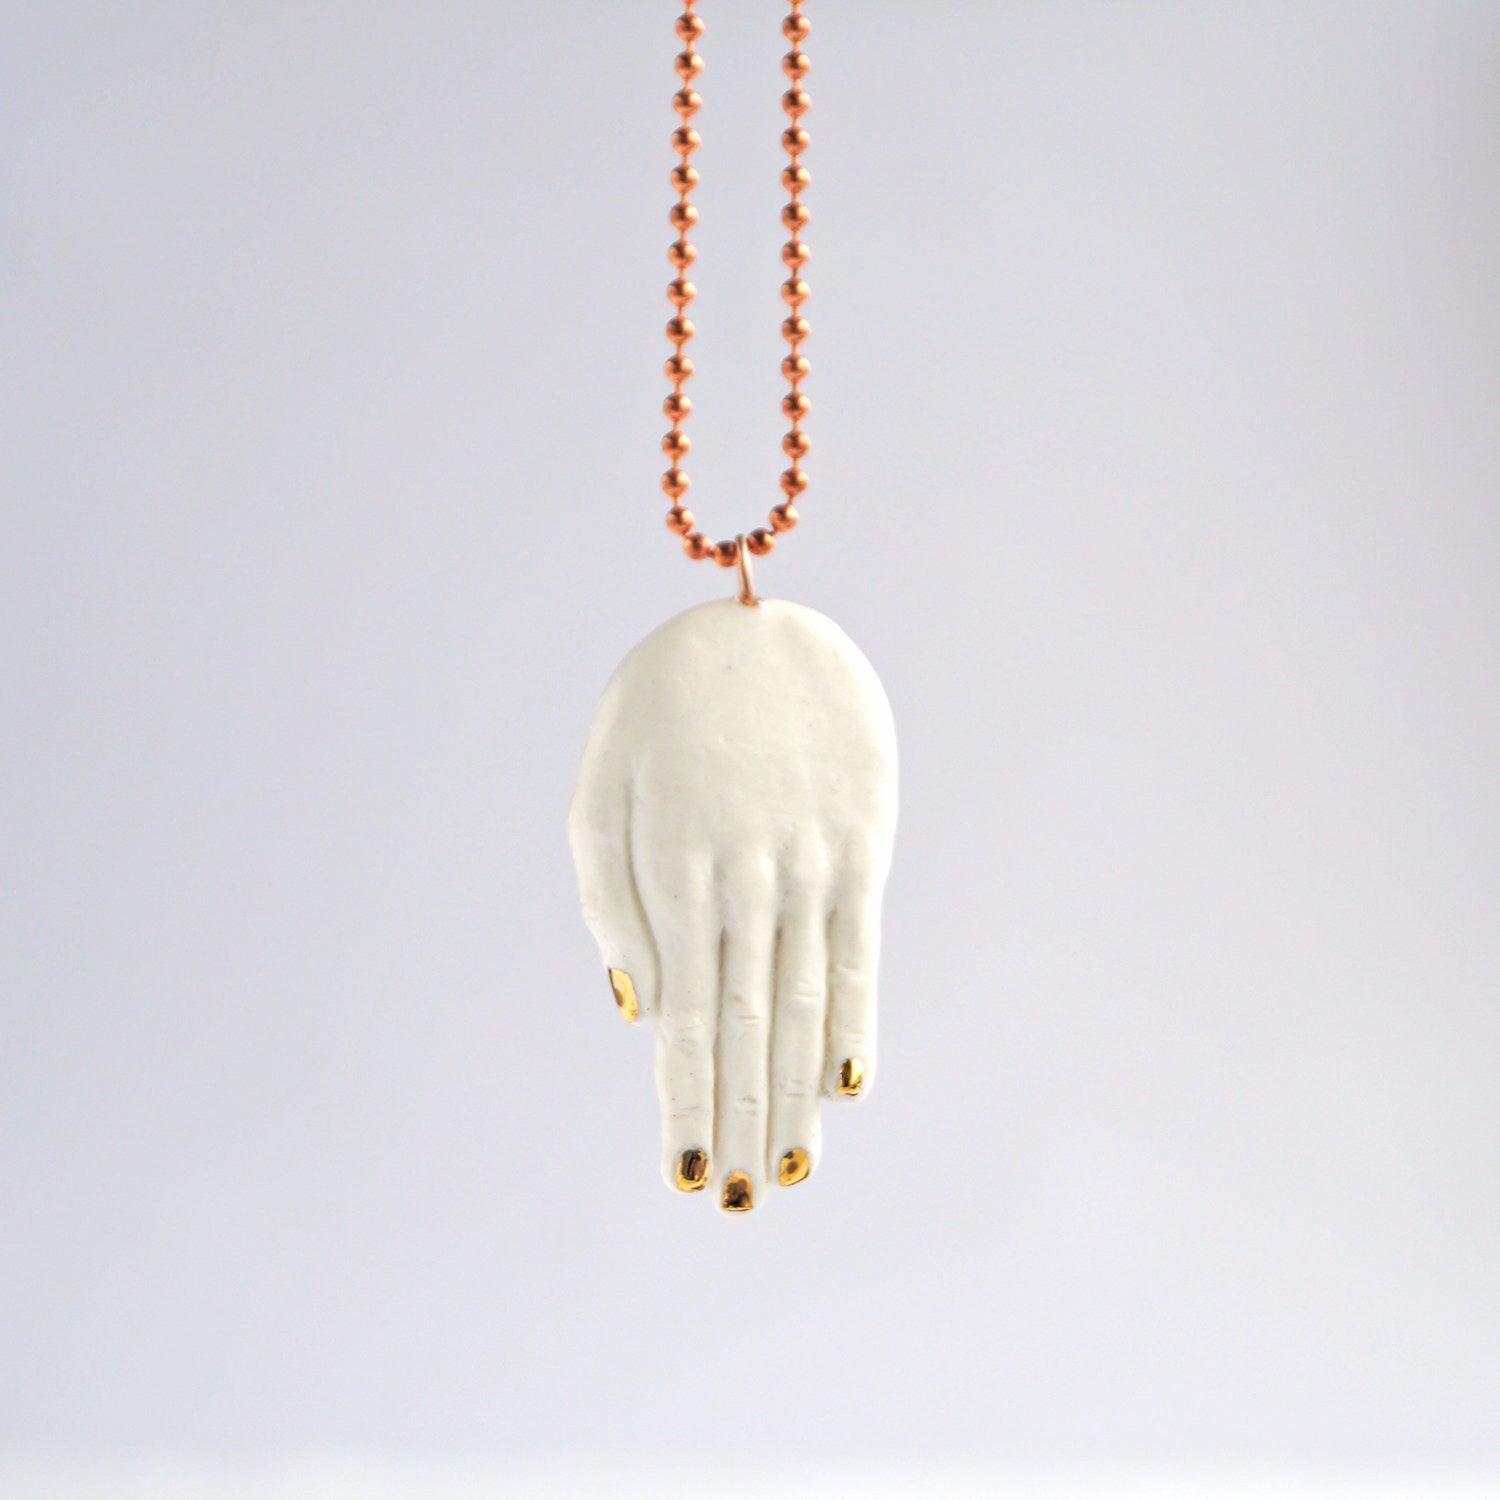 Sculpted hand necklace, porcelain hand necklace, gold lustre, copper chain, 7th anniversary, 22nd anniversary, 18th anniversa